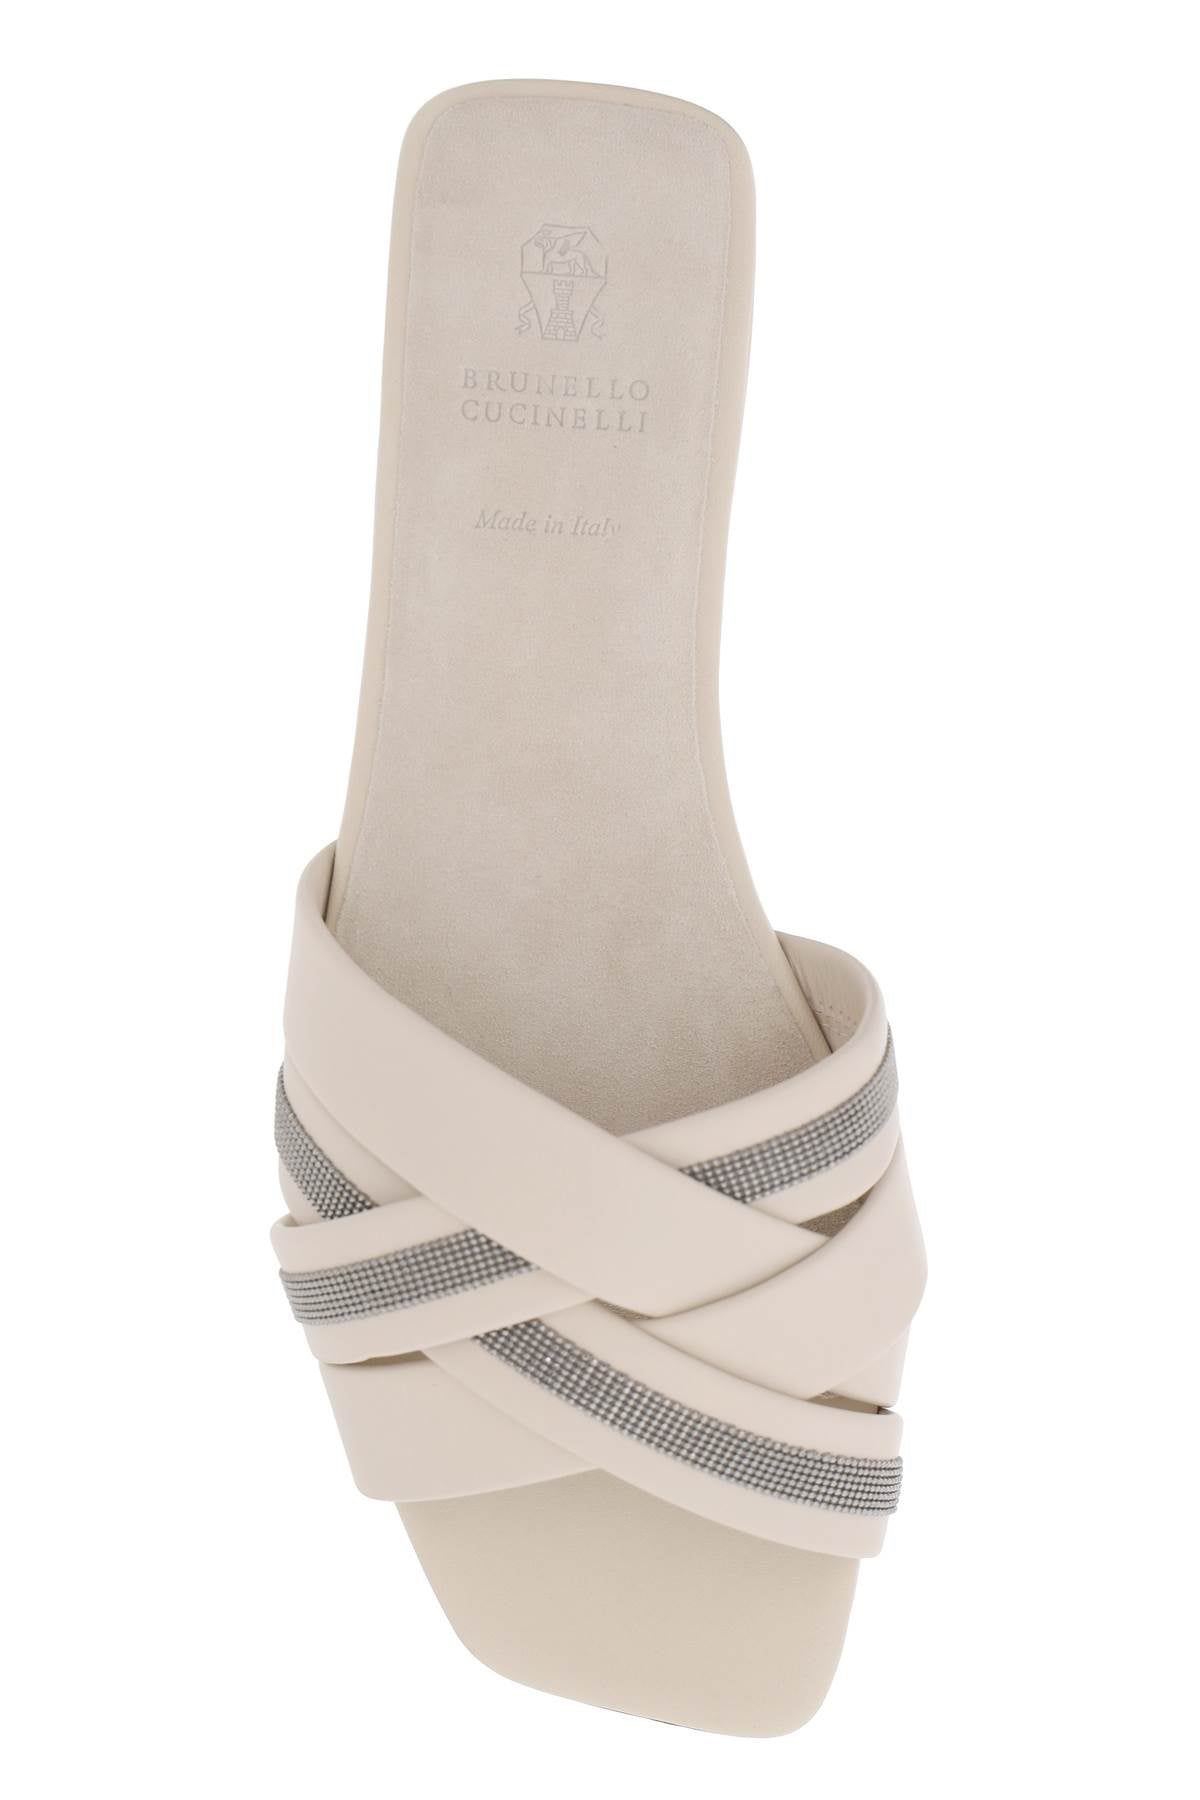 BRUNELLO CUCINELLI Elegant Ivory Leather Slide Sandals with Jewellery for Women